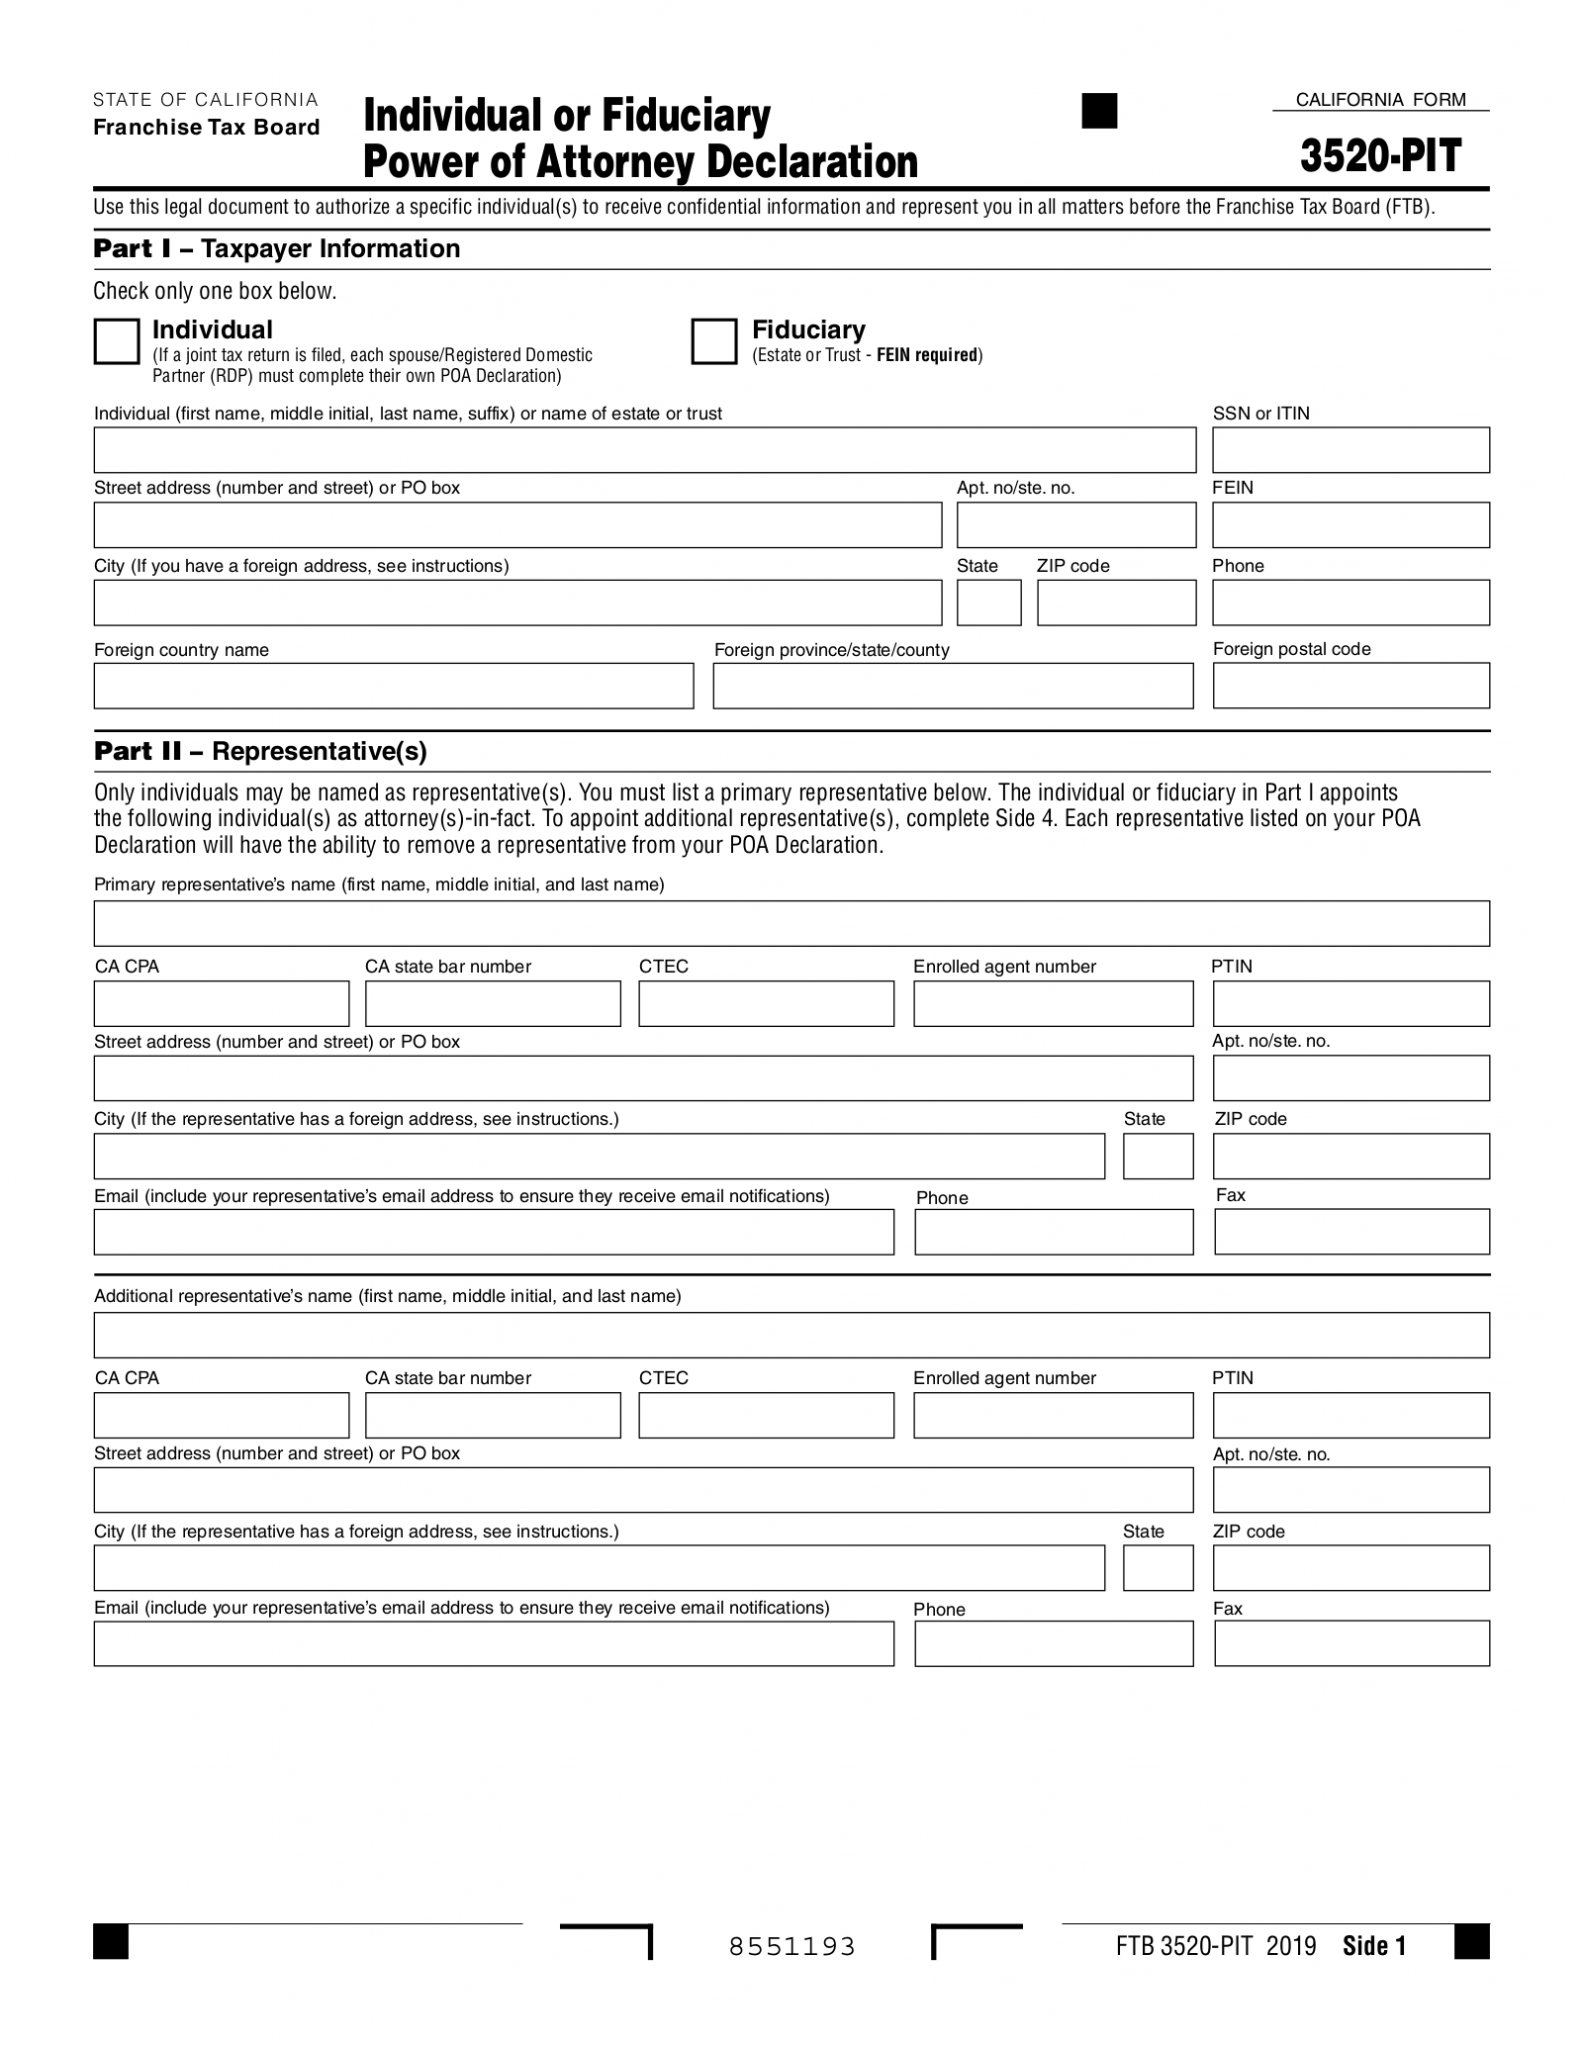 Free California Power Of Attorney Forms 9 Types Pdf Word Eforms